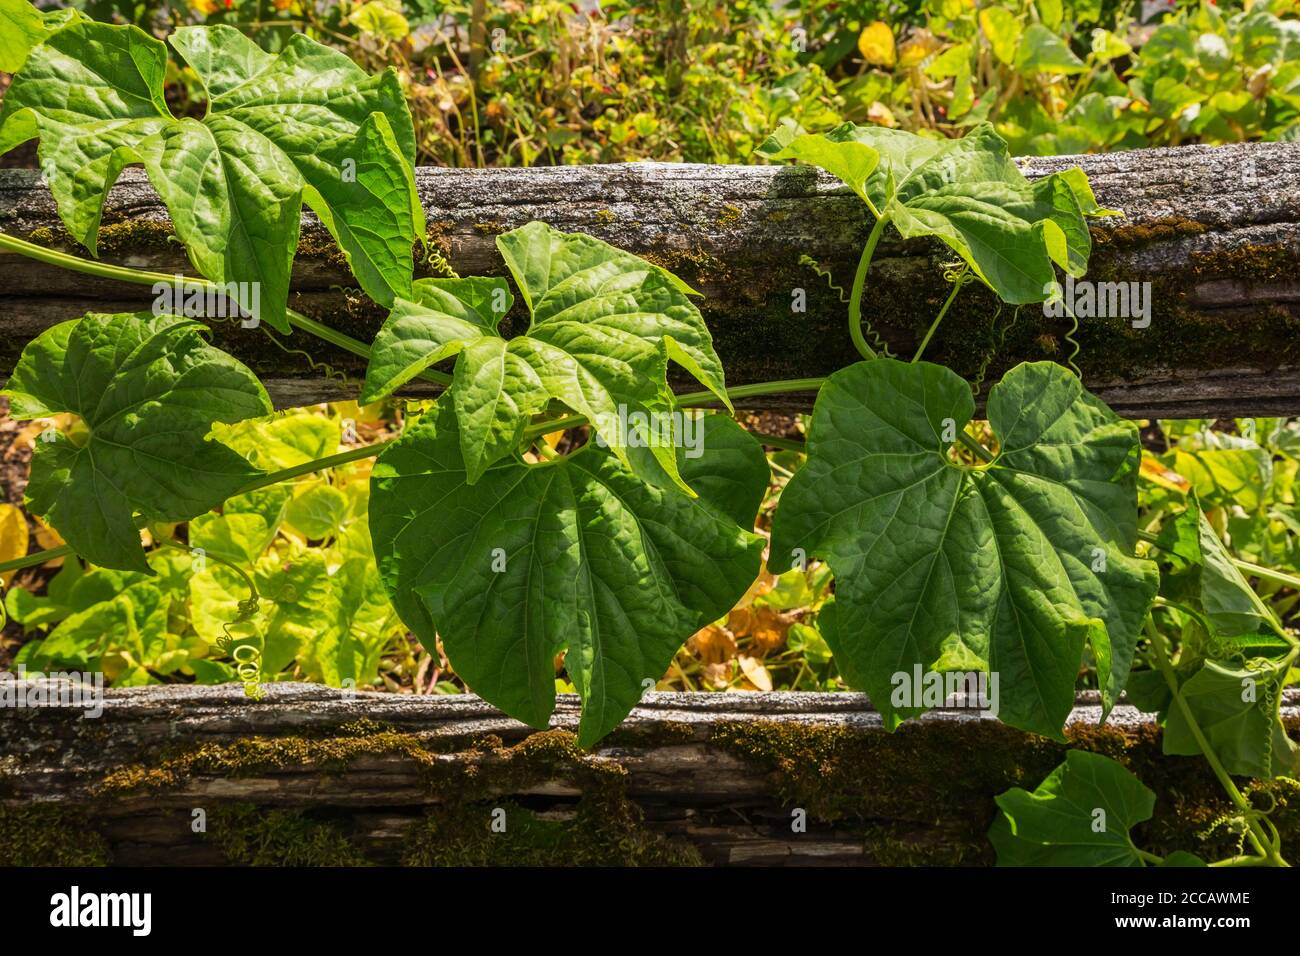 Vigna caracalla - Snail flower plant growing on rustic wooden fence. Stock Photo